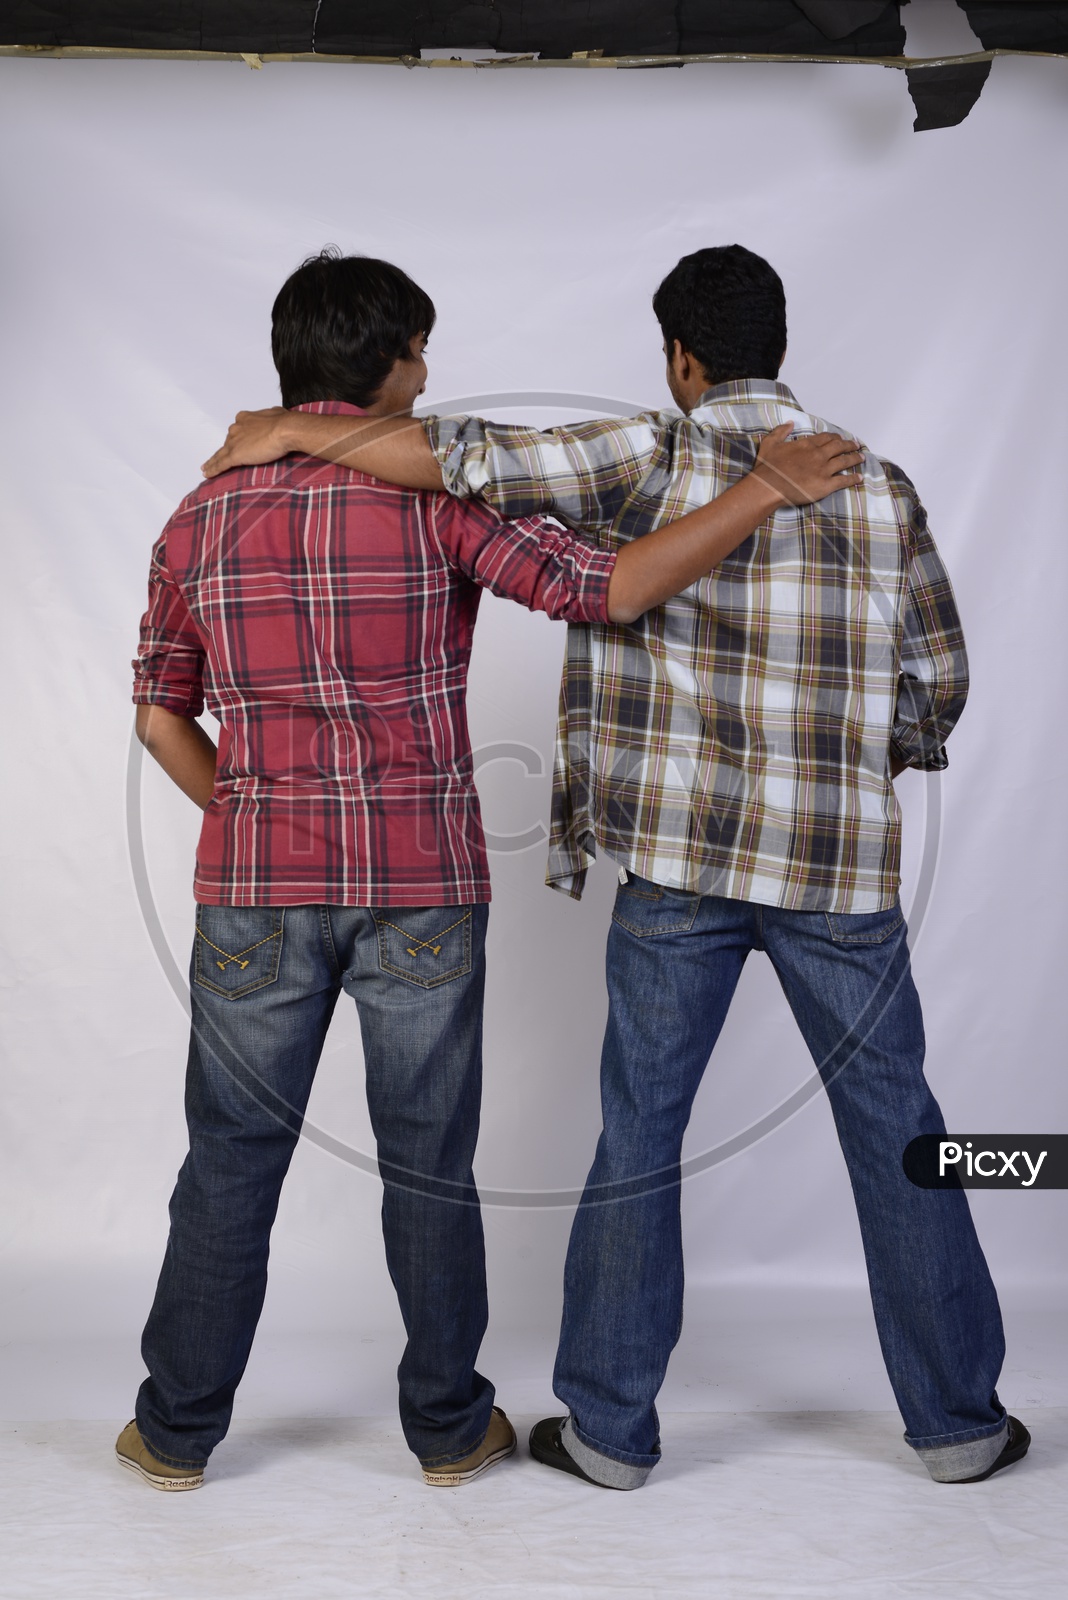 A Couple Of Boys Or Friends With Hands On Their Shoulders On Each  Other   Standing  On An Isolated White Background